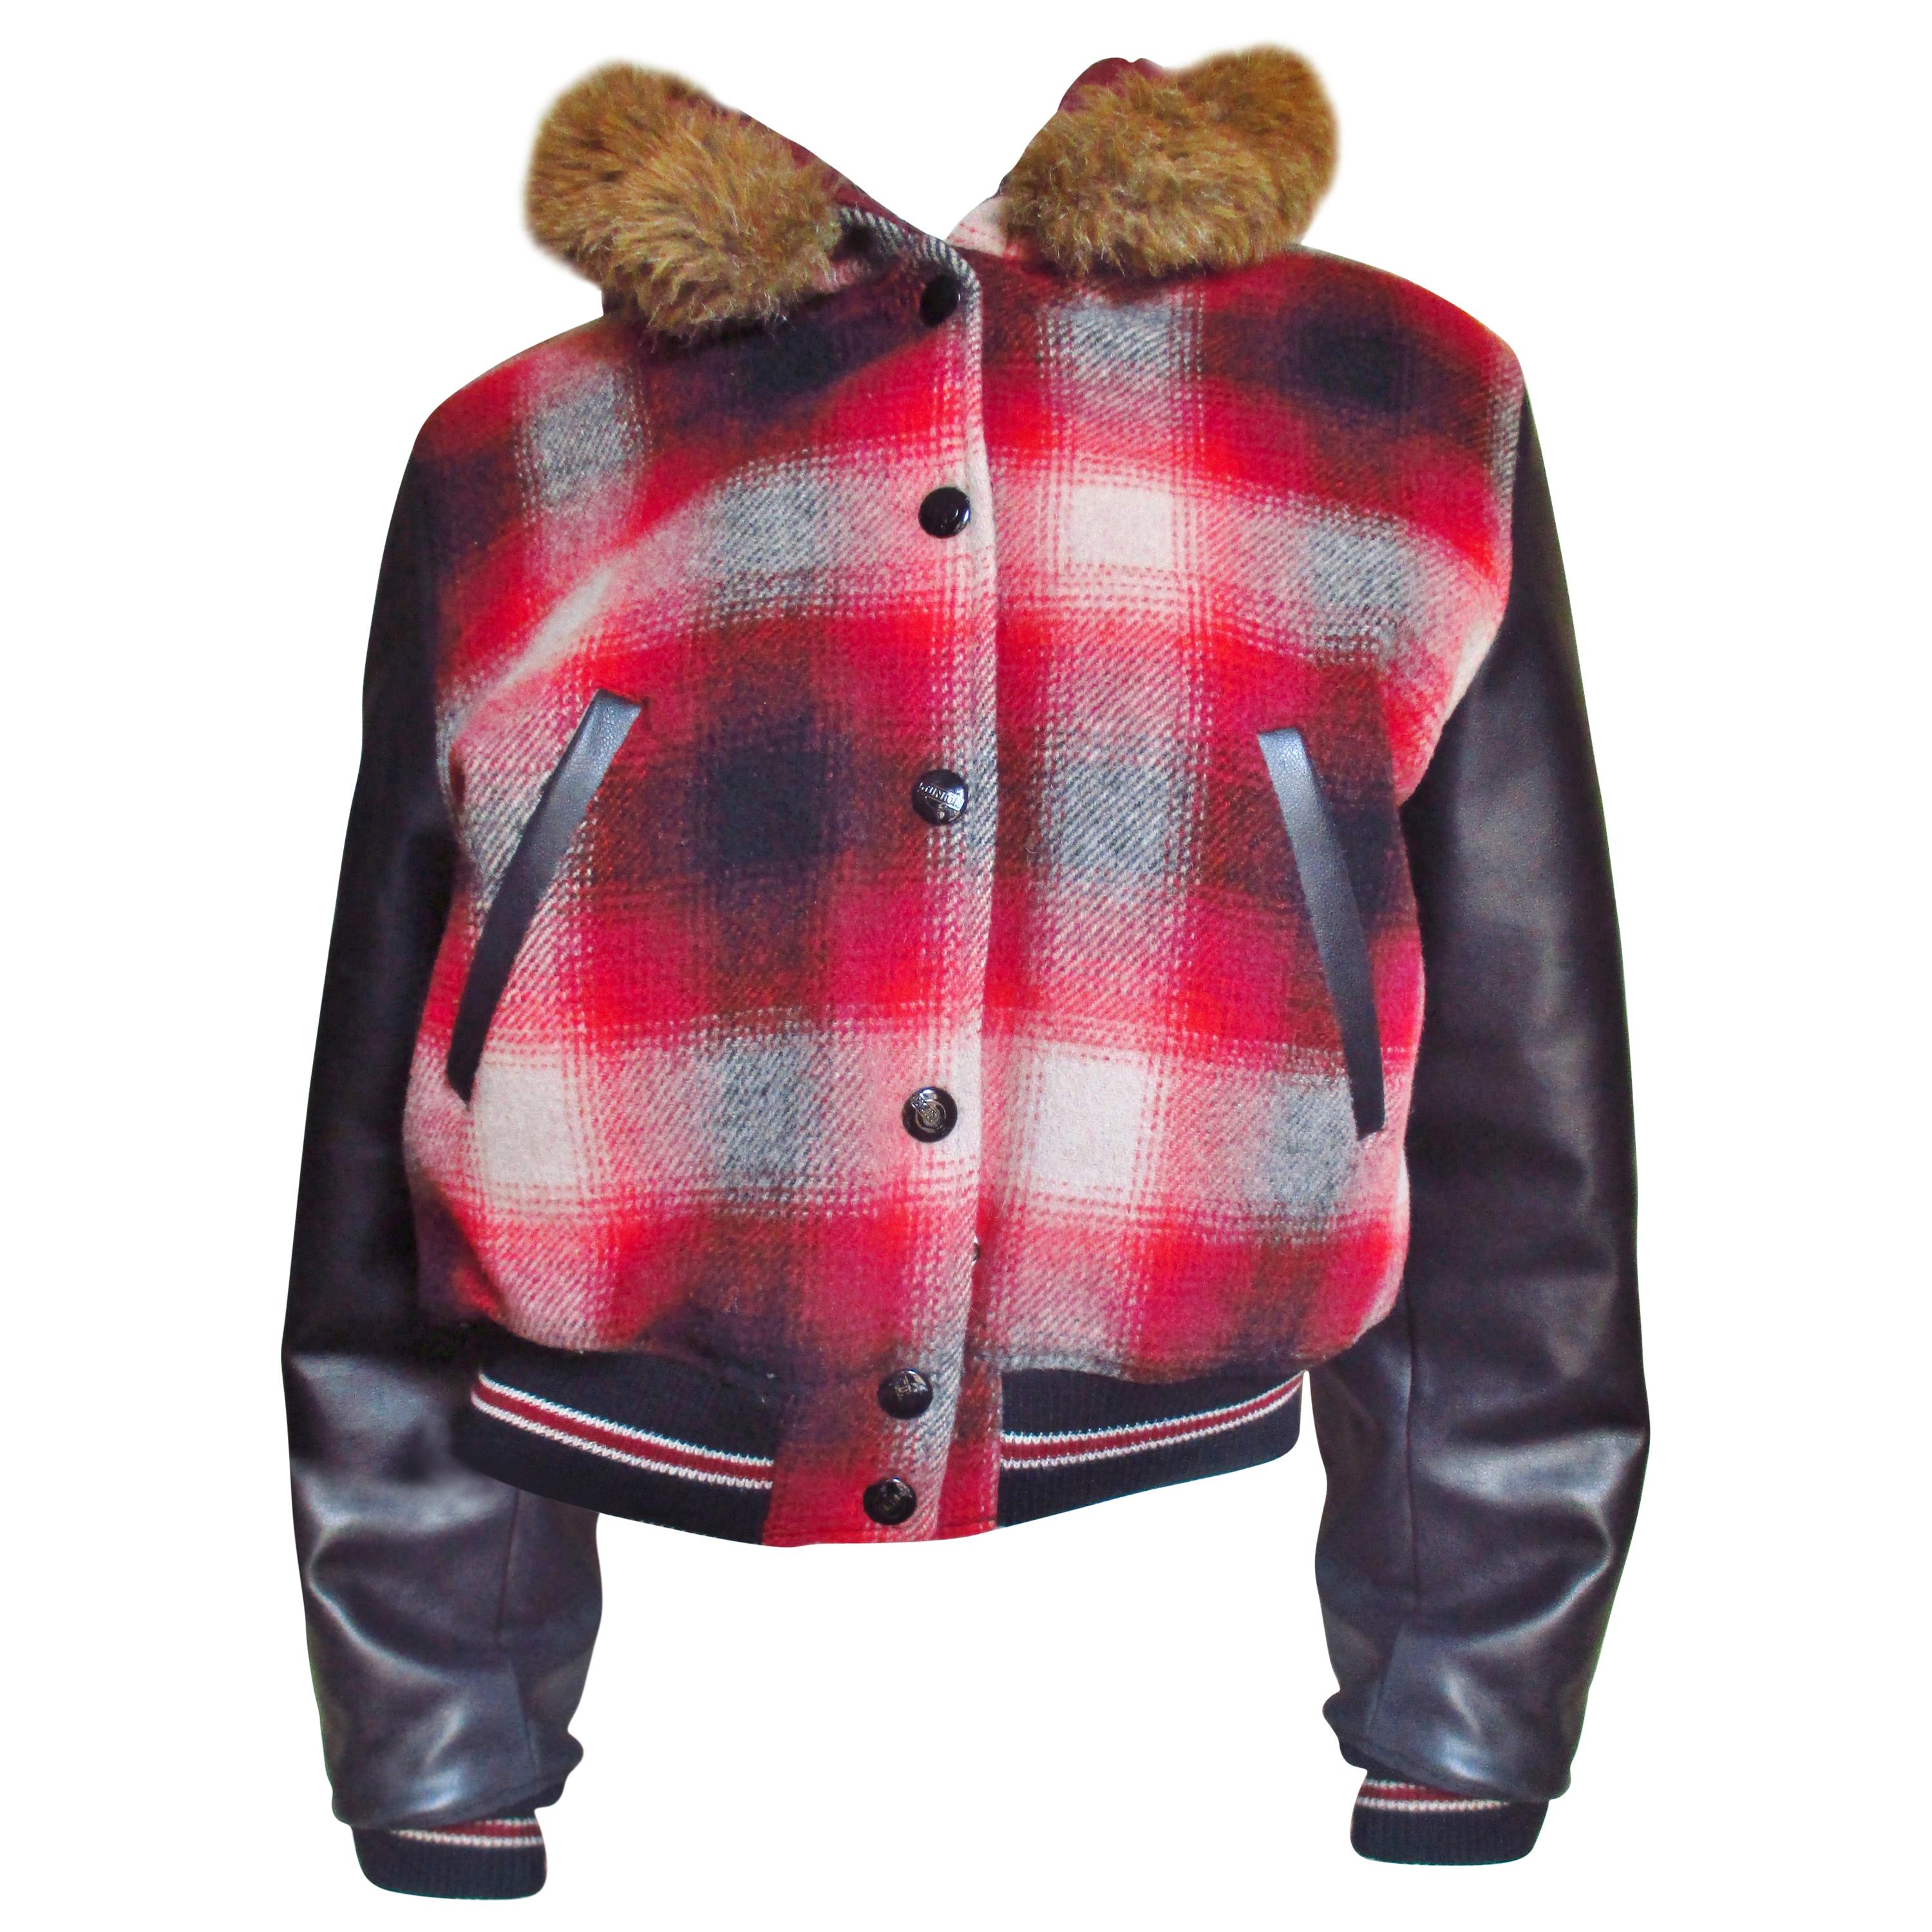 1980s Junior Gaultier Plaid Jacket with Hood